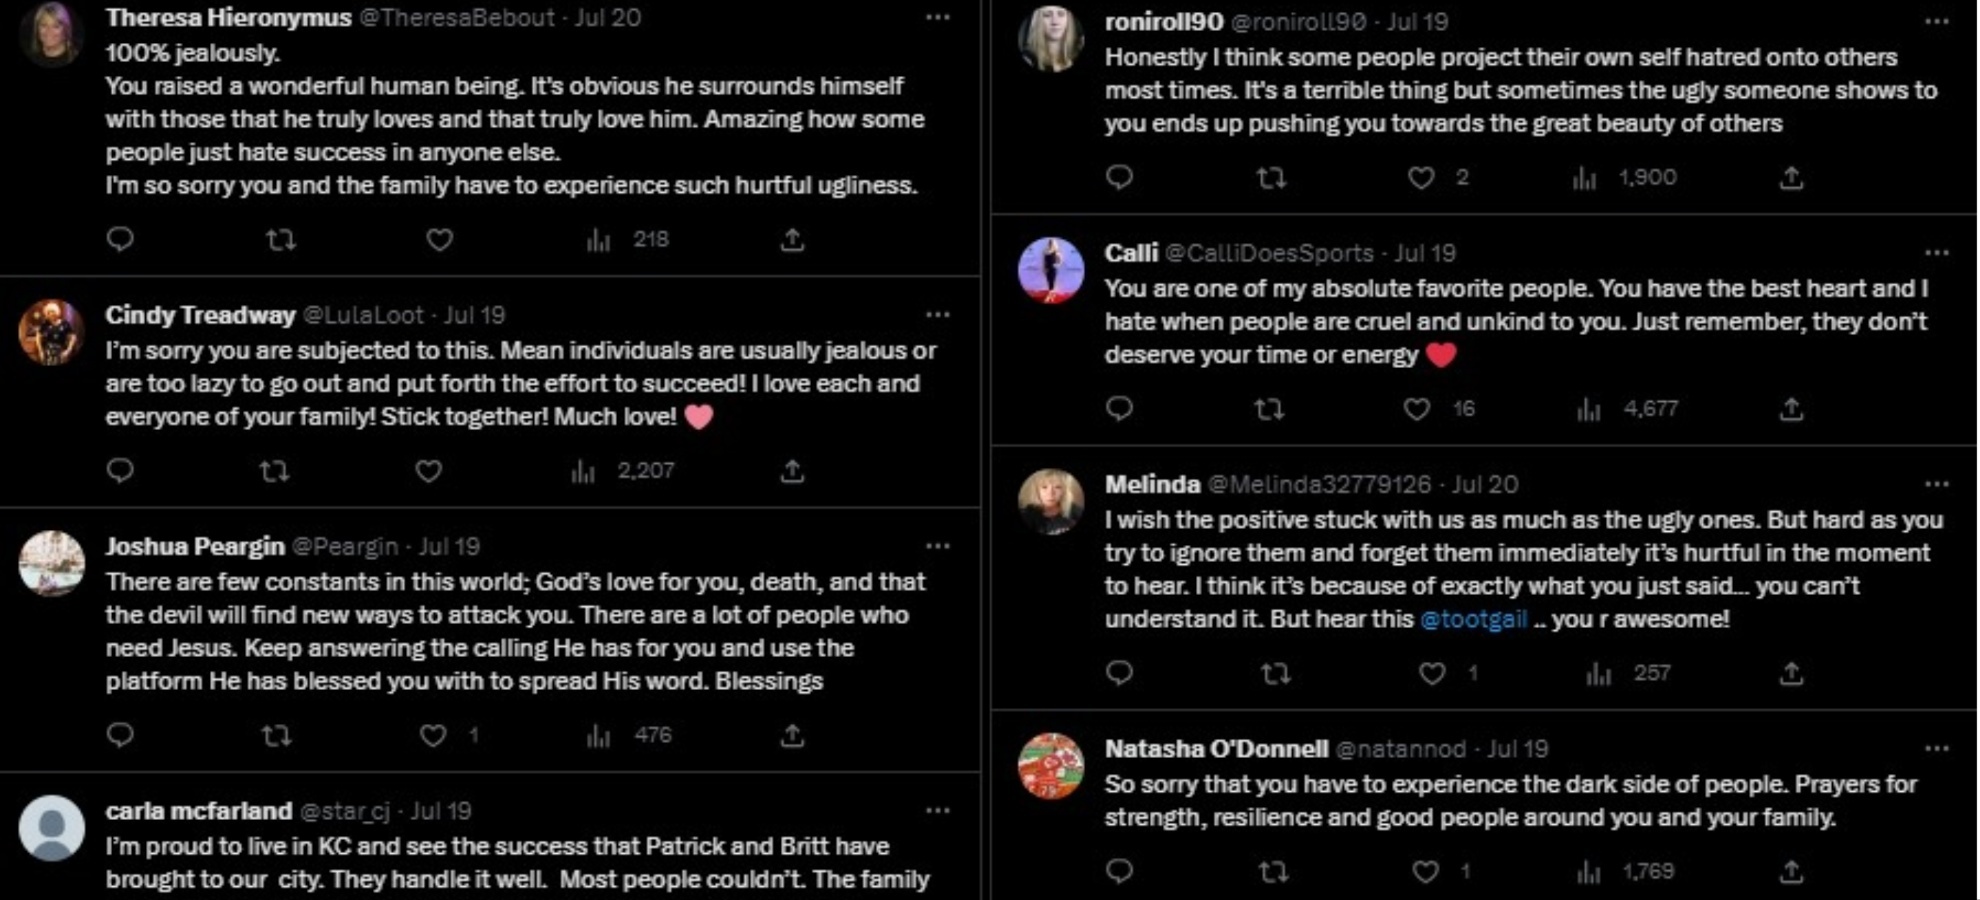 Comments on Randi Mahomes' Twitter message